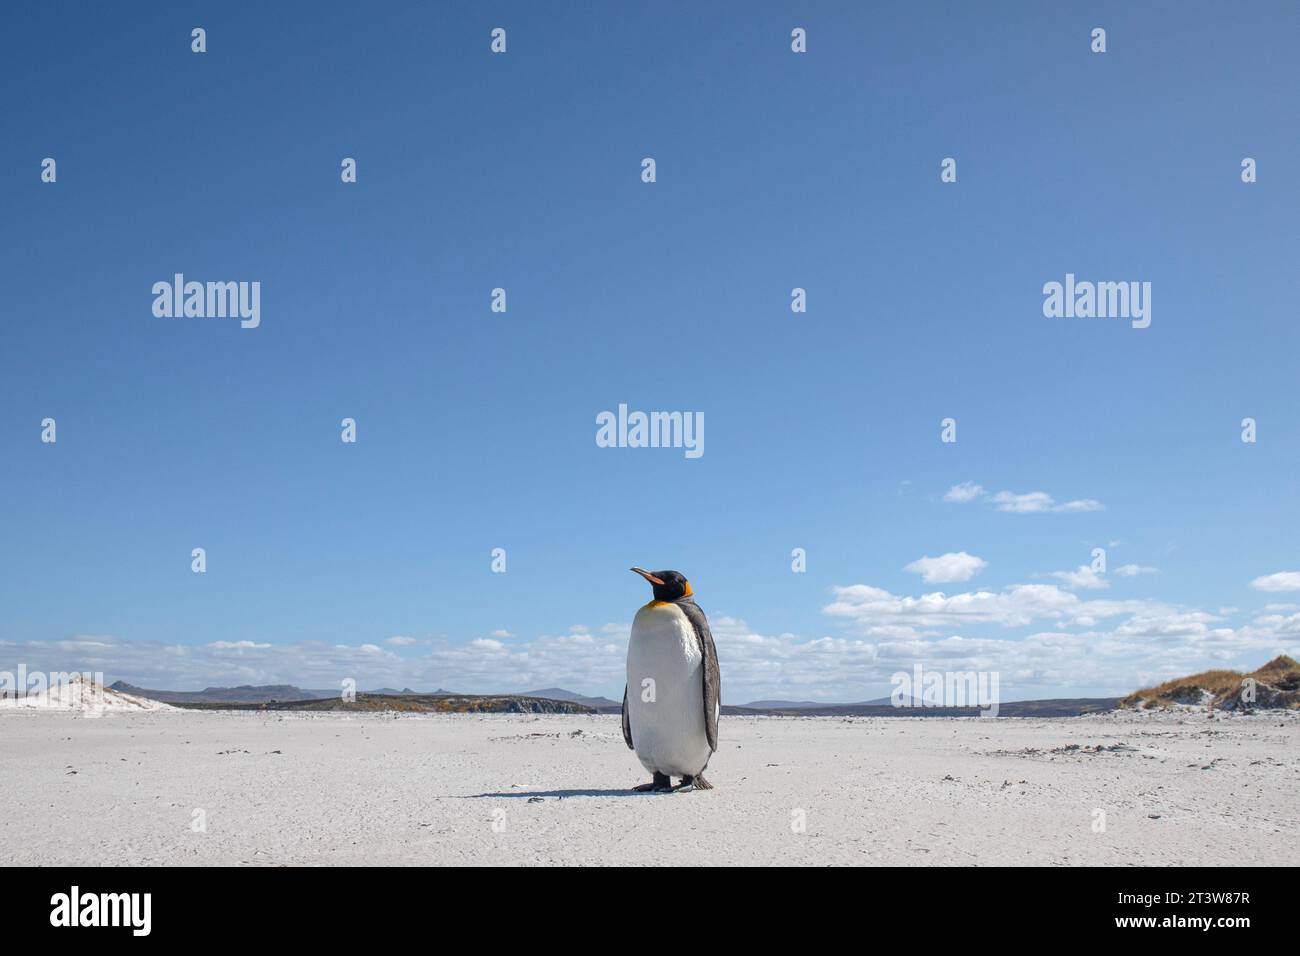 A King Penguin, Aptenodytes patagonicus, on Yorke Bay beach, near Stanley in The Falkland Islands. Stock Photo